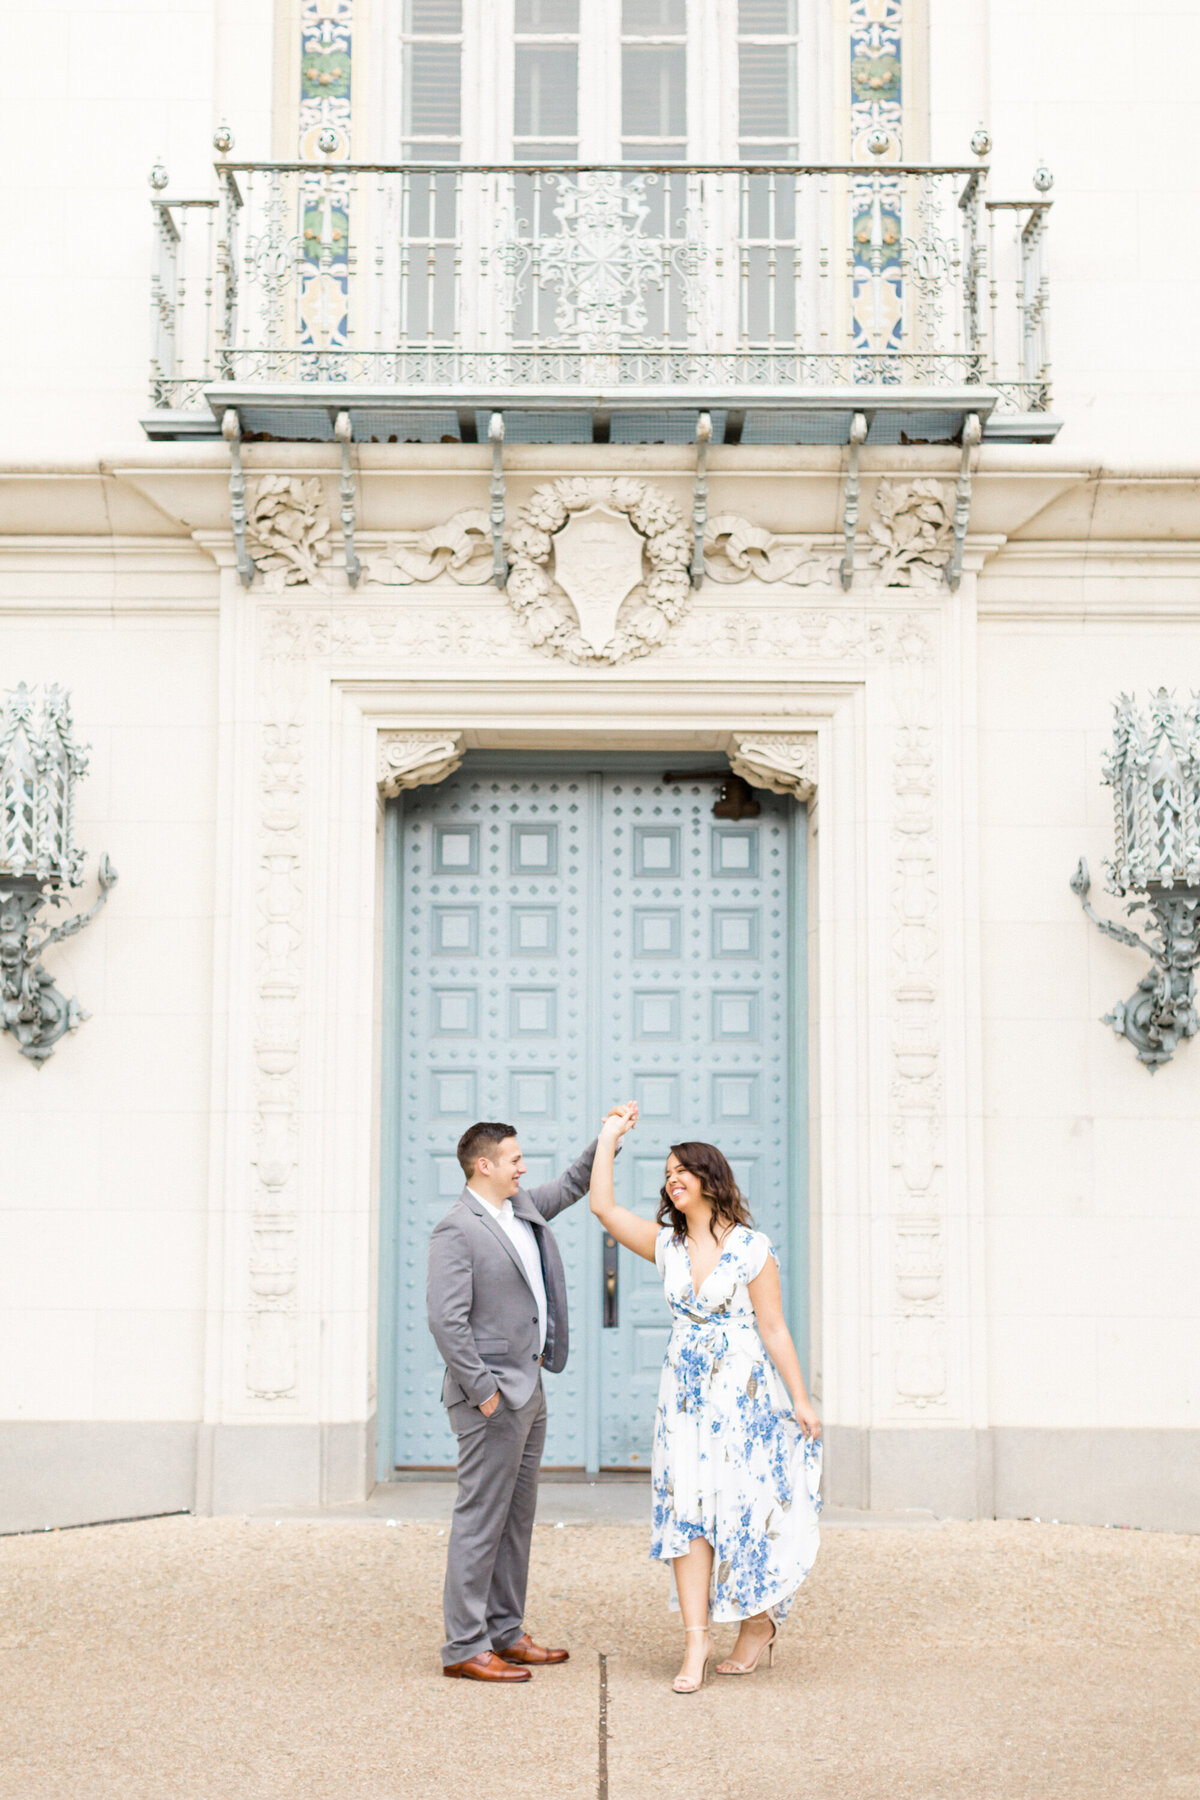 Jessica Chole Photography San Antonio Texas California Wedding Portrait Engagement Maternity Family Lifestyle Photographer Souther Cali TX CA Light Airy Bright Colorful Photography23